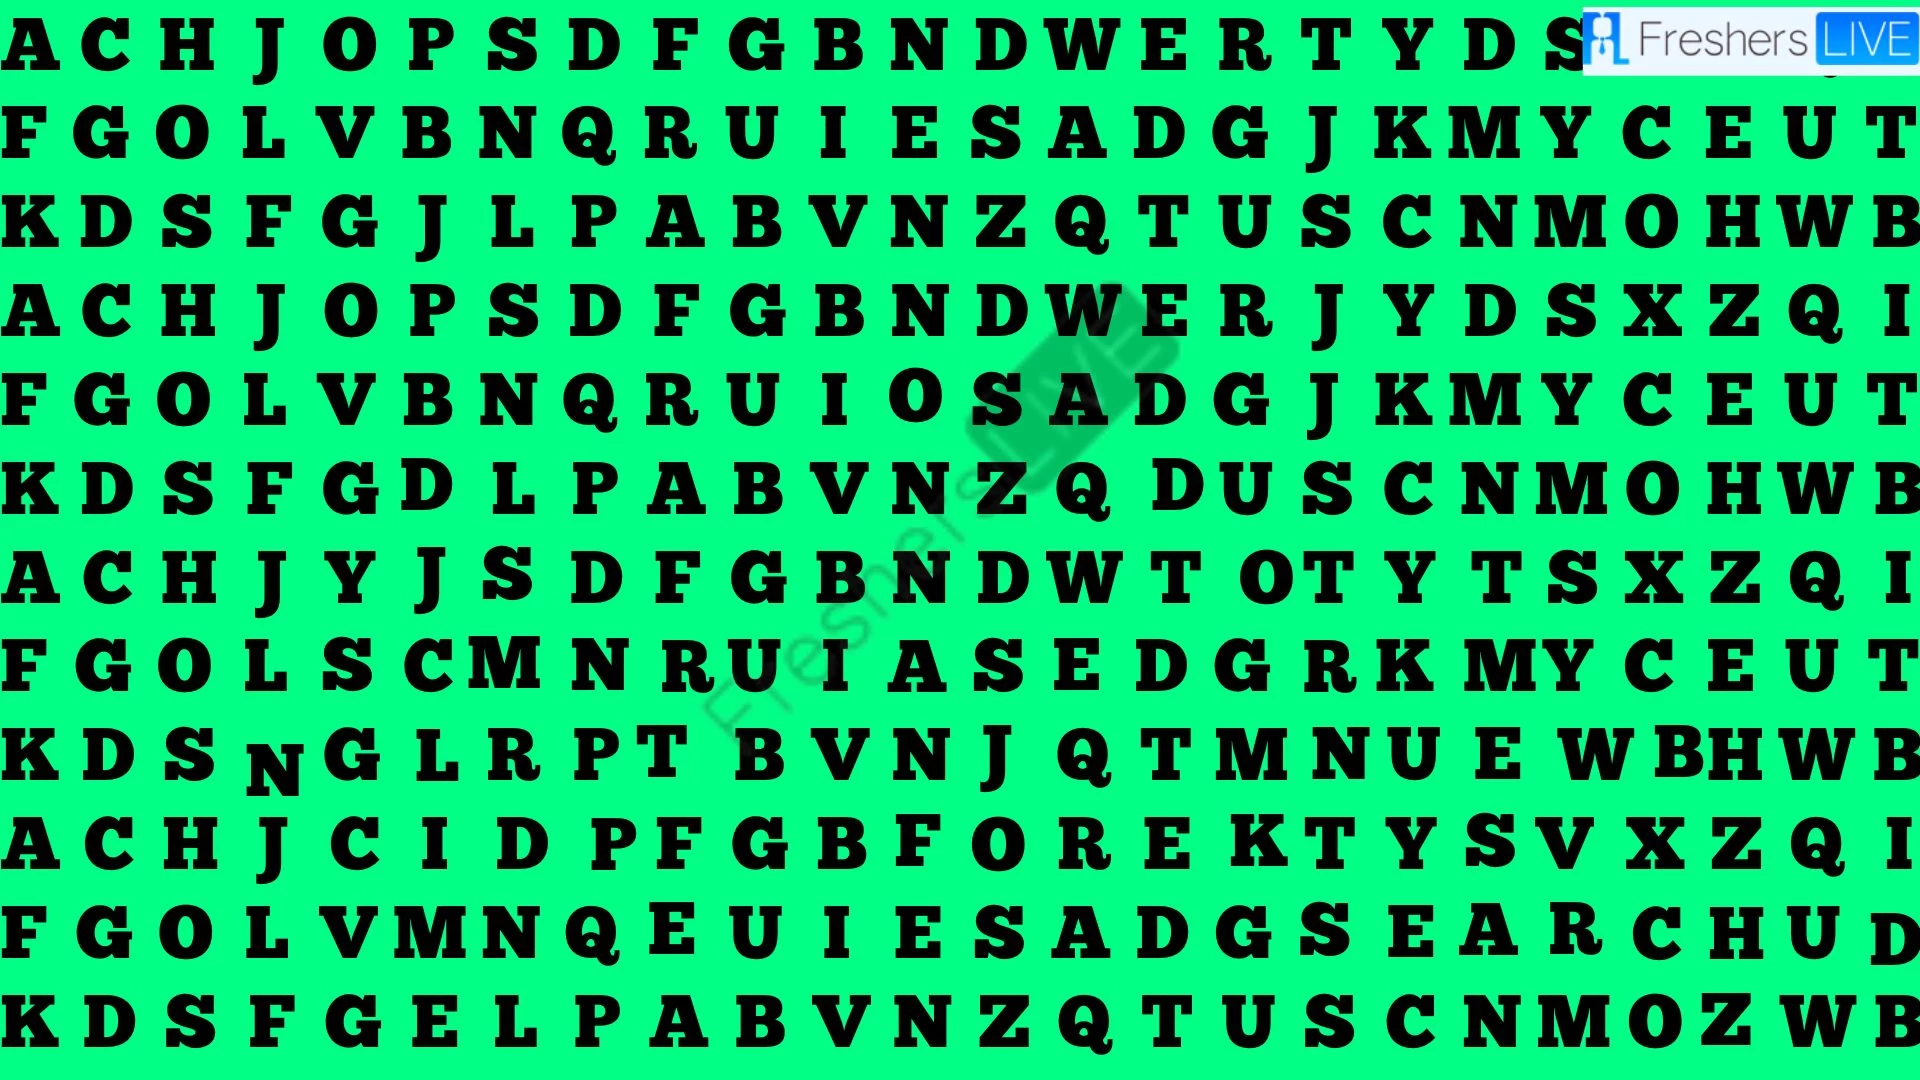 Are you smart enough to Find the Word Search in the Picture in Just 10 Seconds